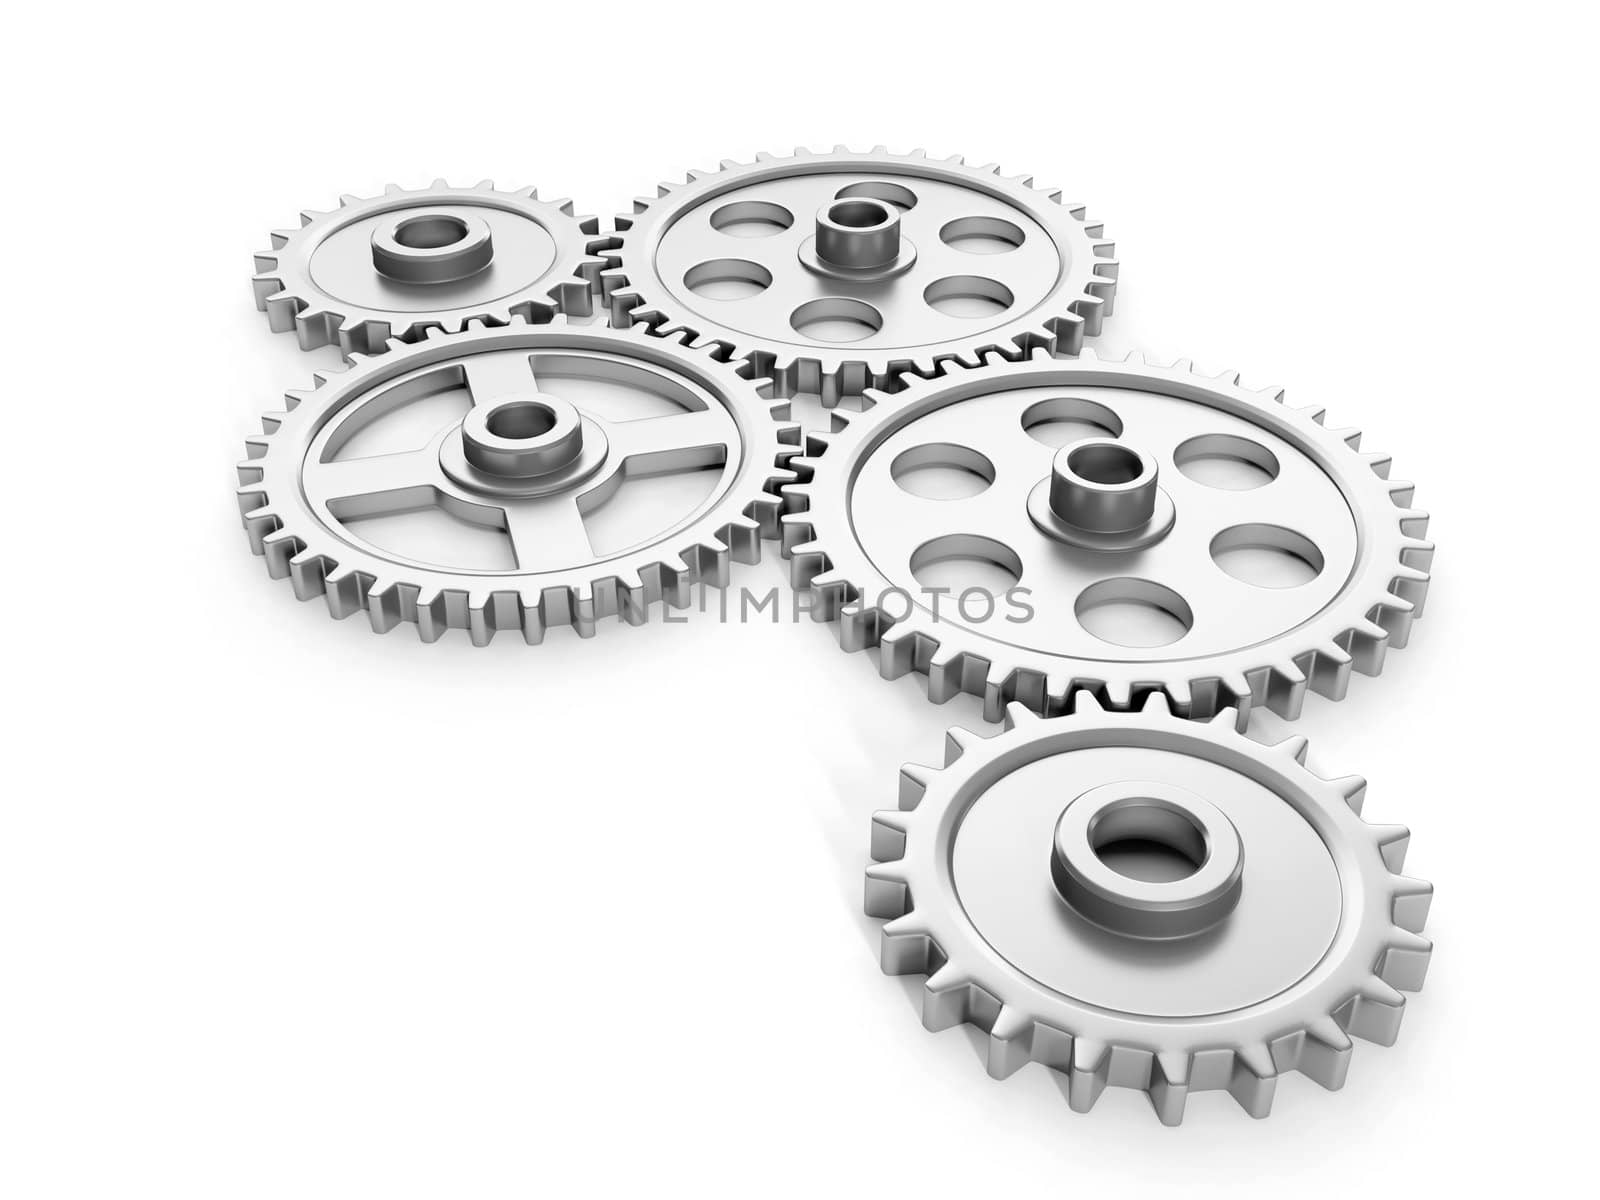 3d illustration: Group gears on a white background